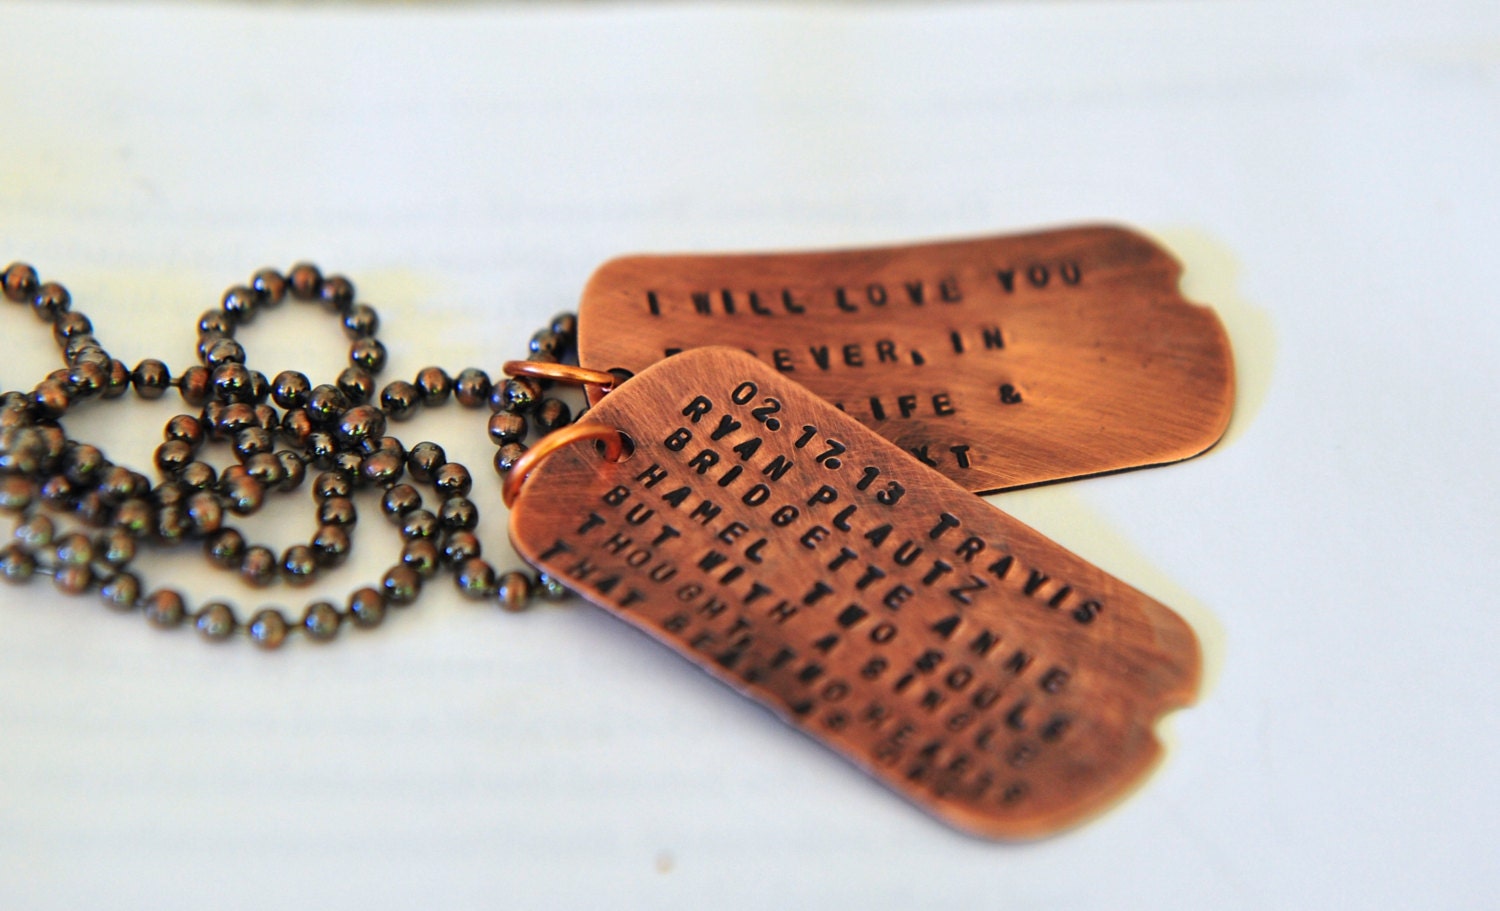 engraved dog tags jewelry